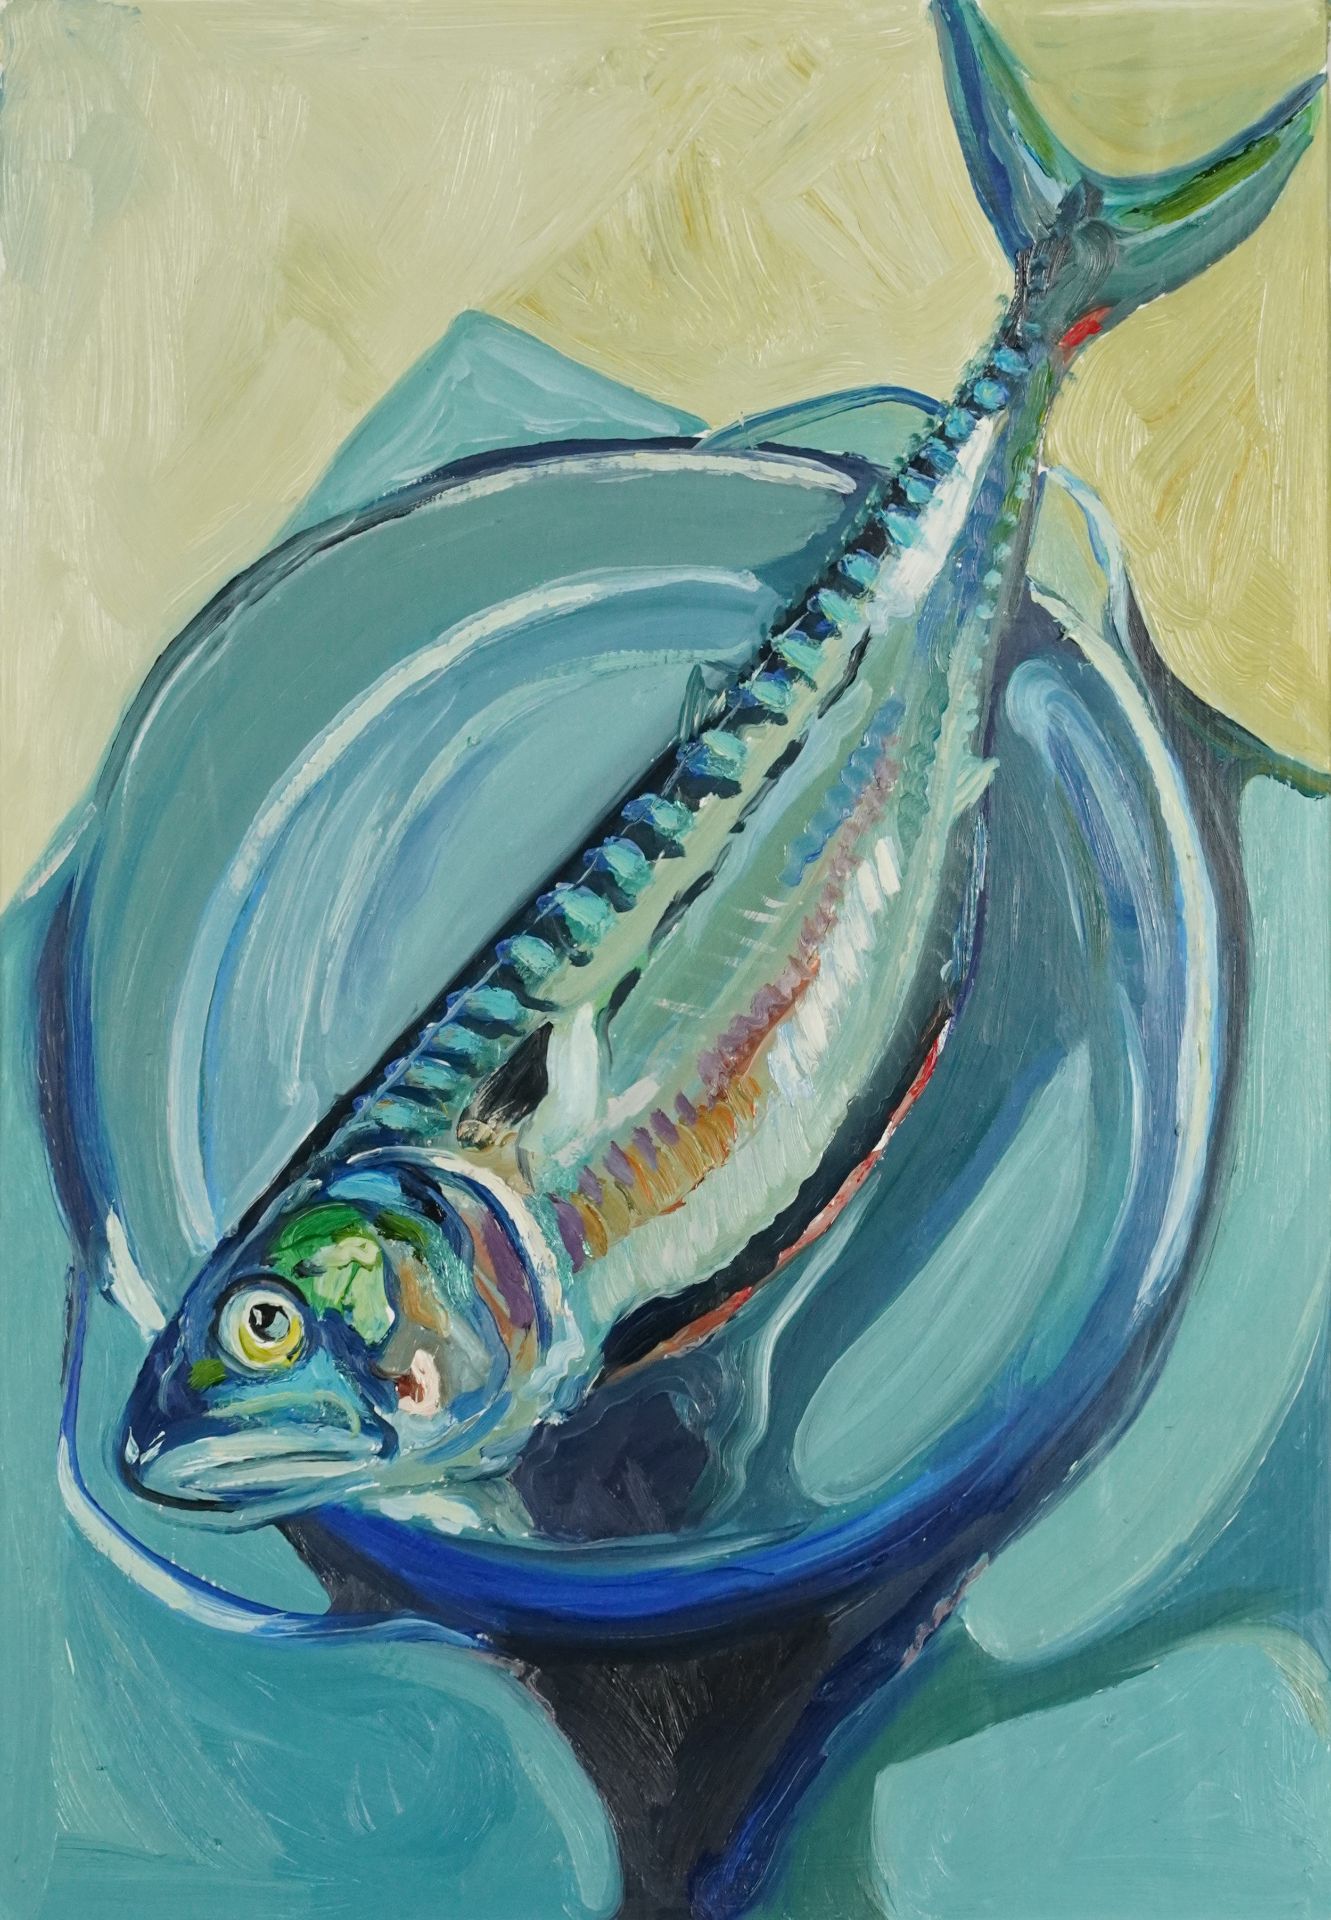 Clive Fredriksson - Still life with fish, contemporary oil on board, mounted and framed, 42cm x 30.